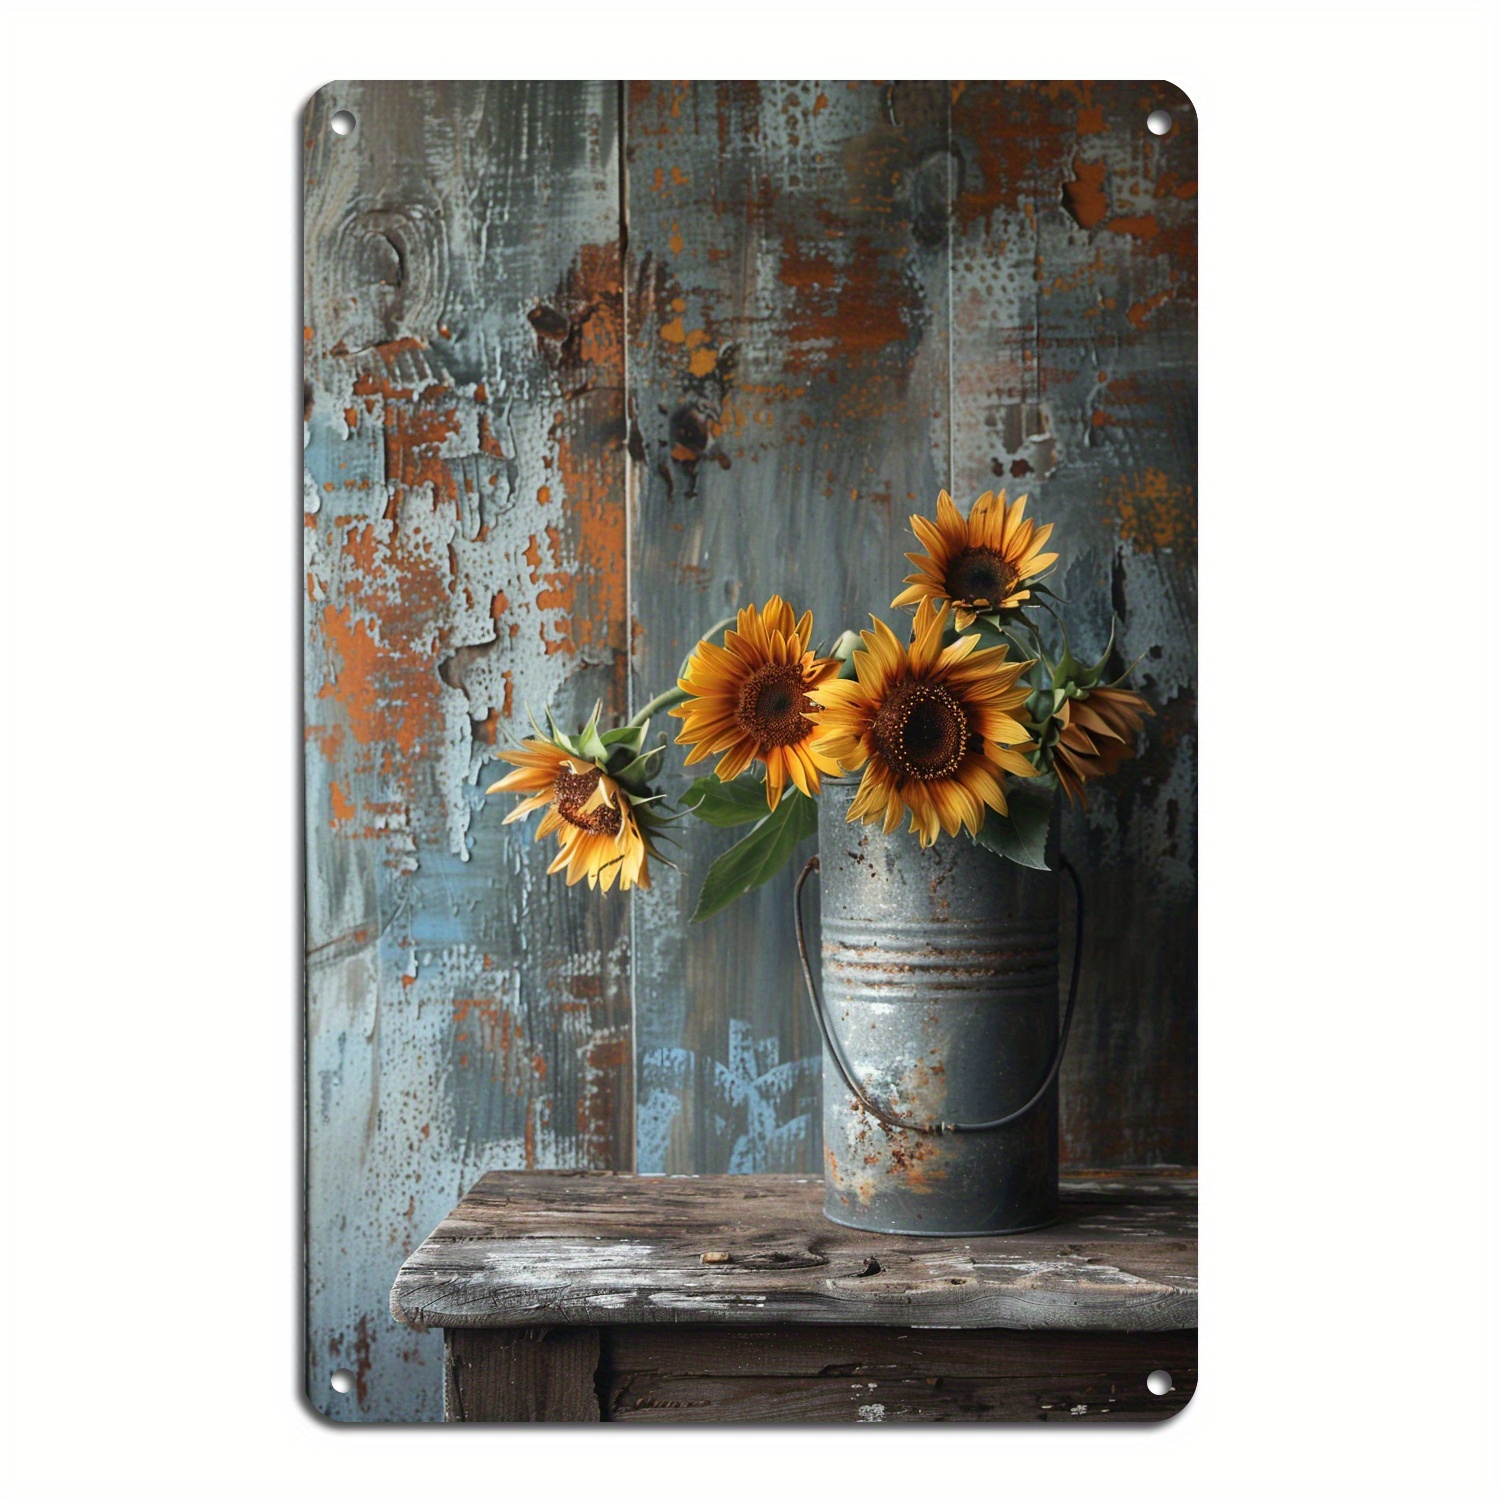 

Yellow Sunflower Vintage Metal Tin Sign, Farmhouse Kitchen Wall Country Home Decor, Coffee Bar Signs Gifts Garden Decoration 8x12inch